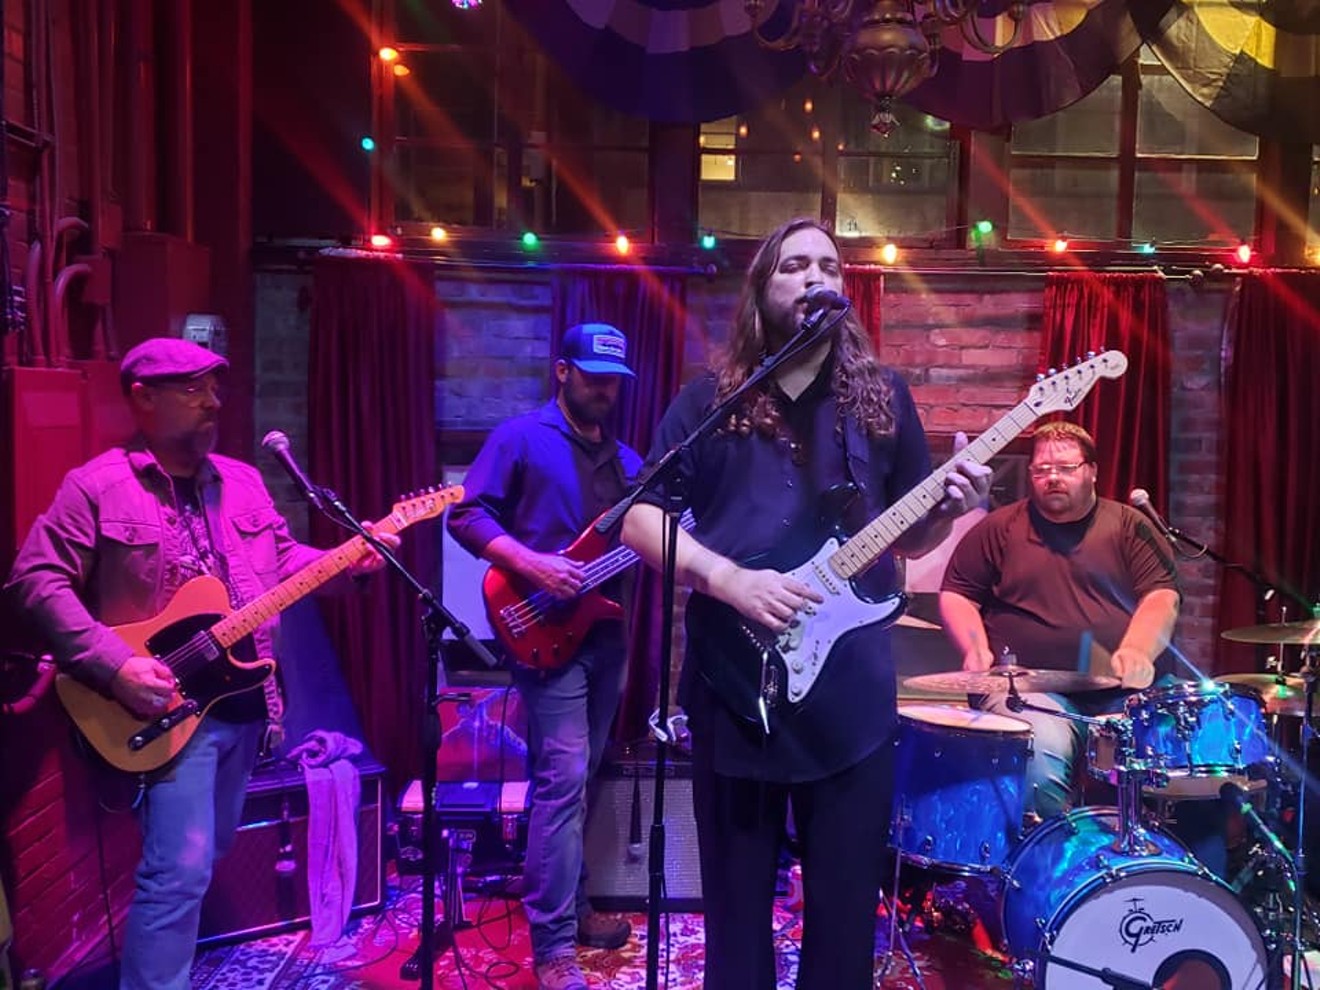 The Matthew Band performing at the Twilite Lounge in Fort Worth in 2022.